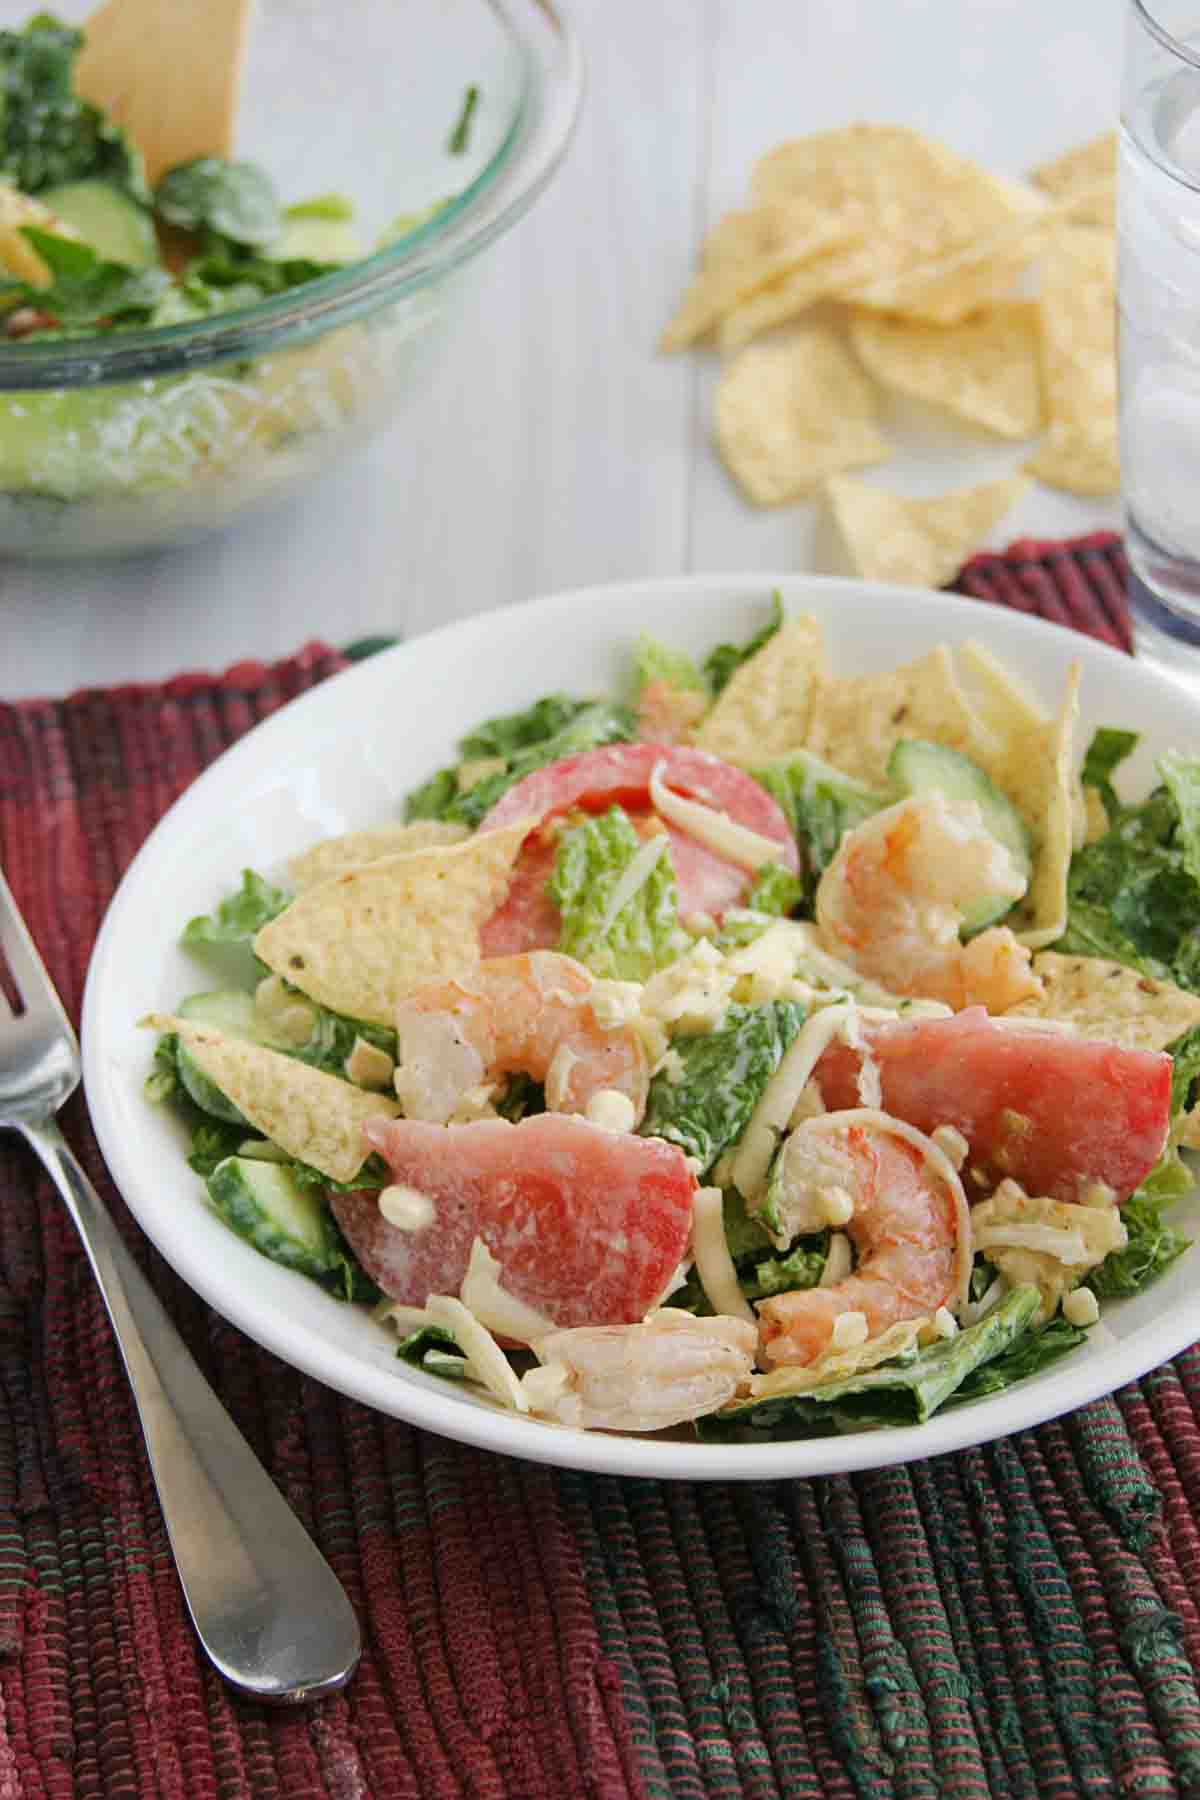 Shrimp and Corn Salad topped with tortilla chips